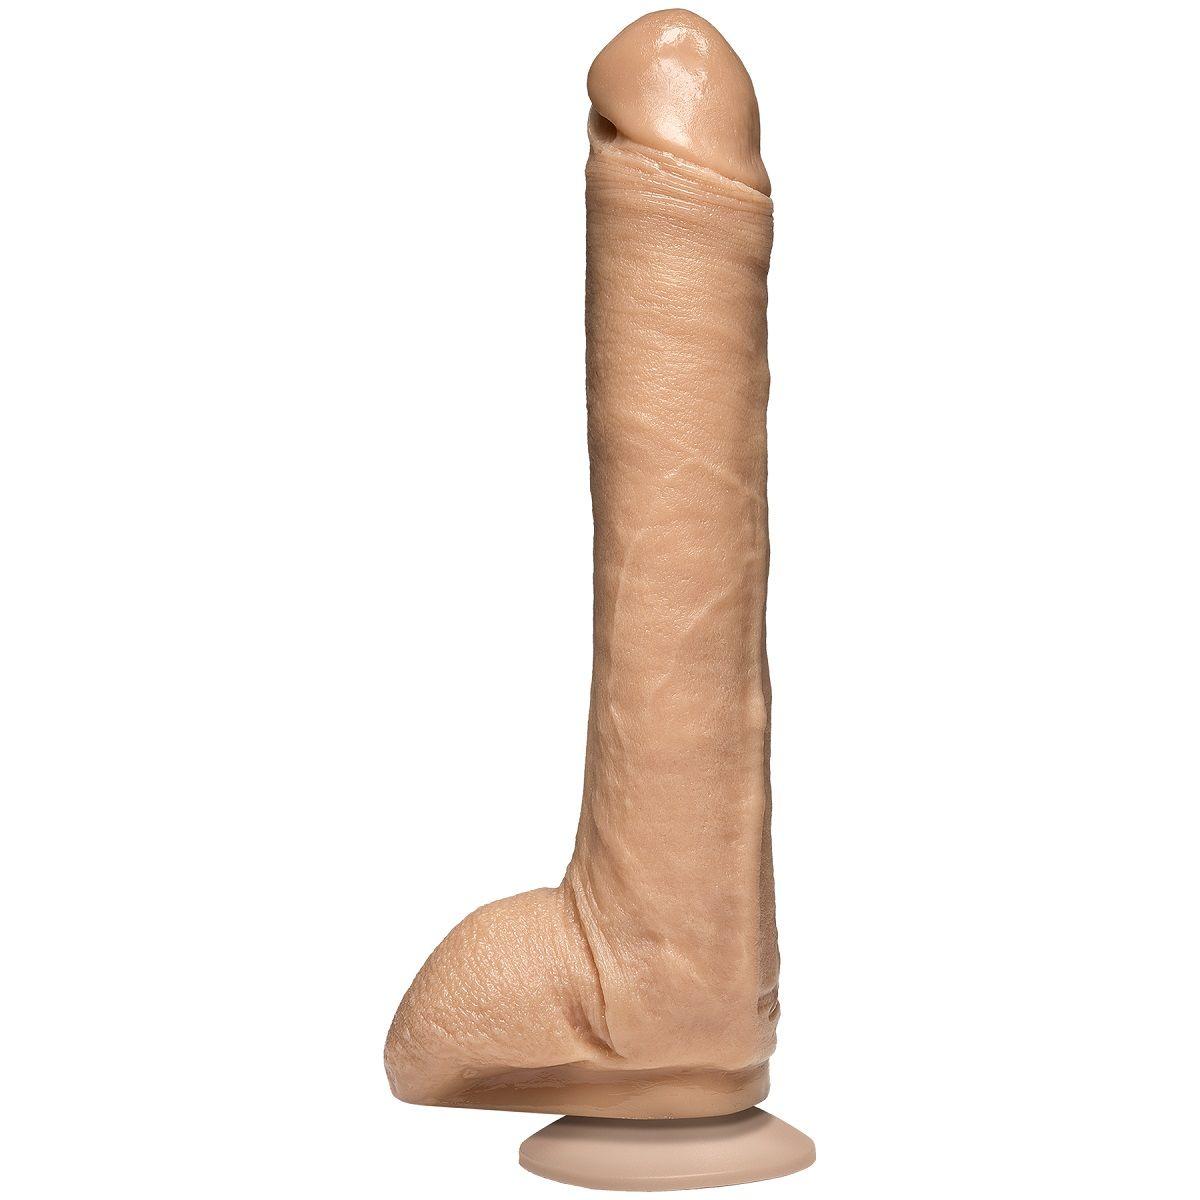 Фаллоимитатор Realistic Kevin Dean 12 Inch Cock with Removable Vac-U-Lock Suction Cup - 31